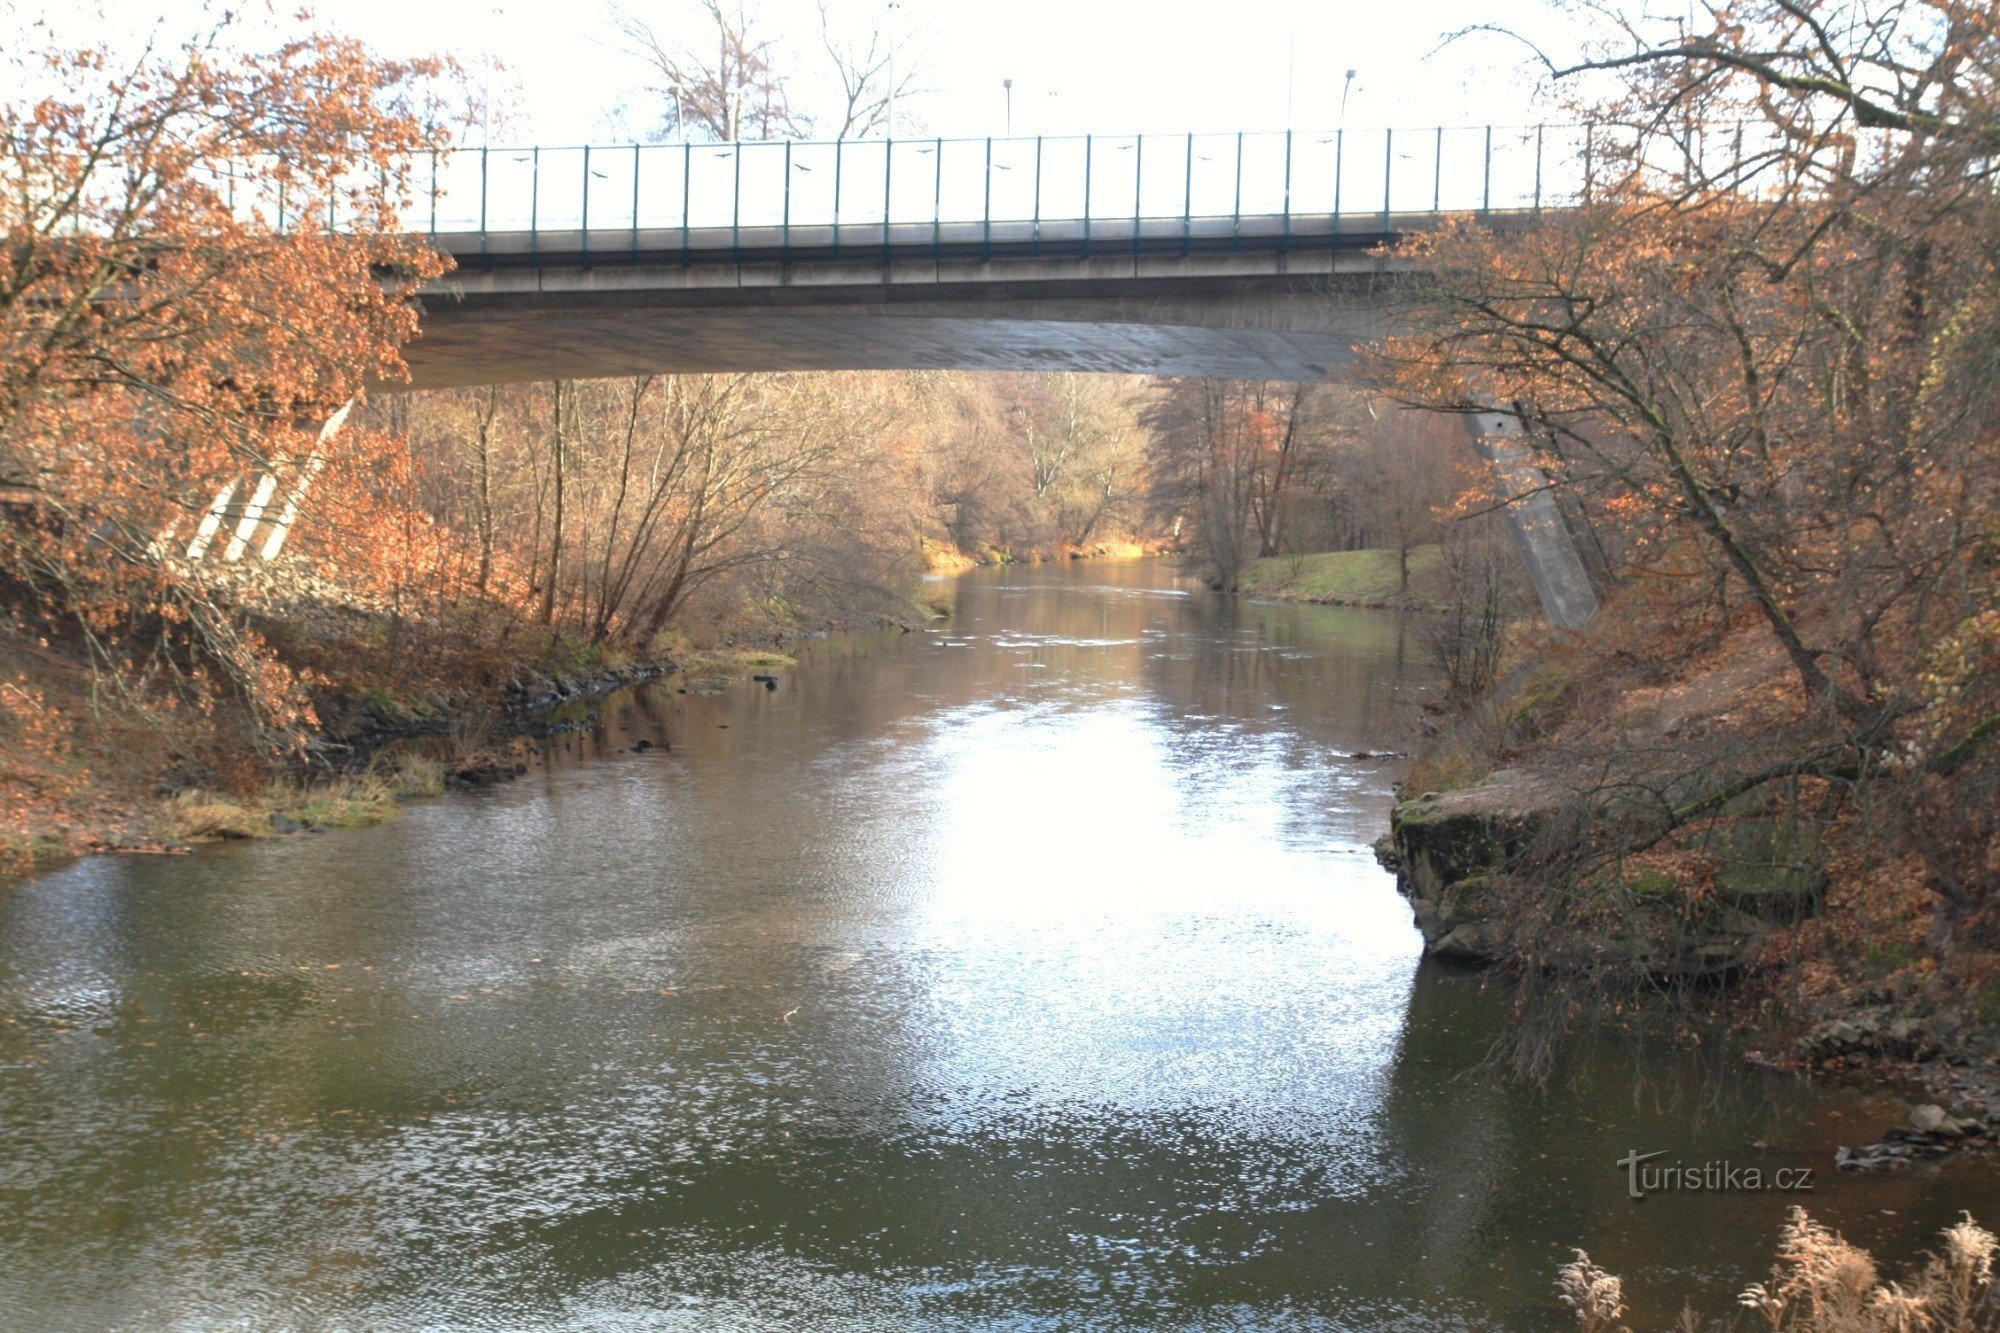 The Svratka River at the exit from the Pisarecké tunnel